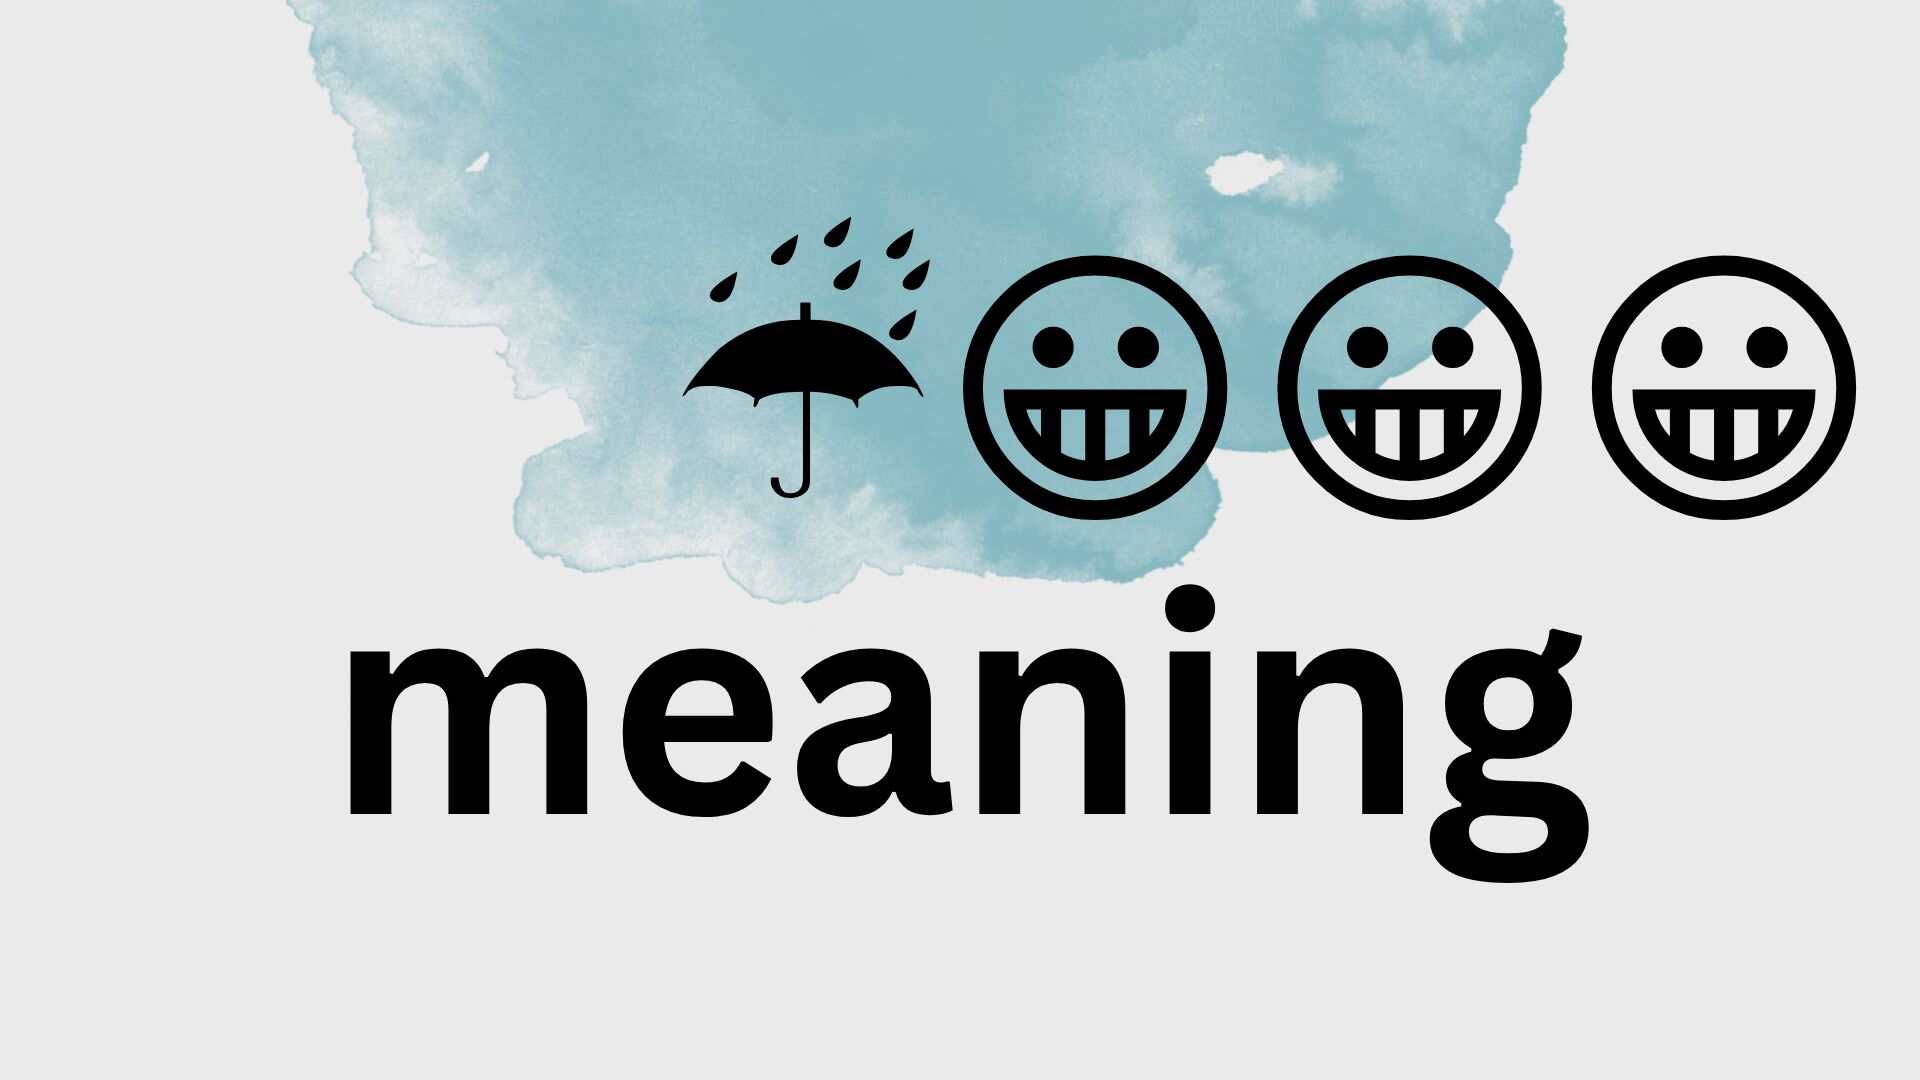 ☔😀😀😀 meaning